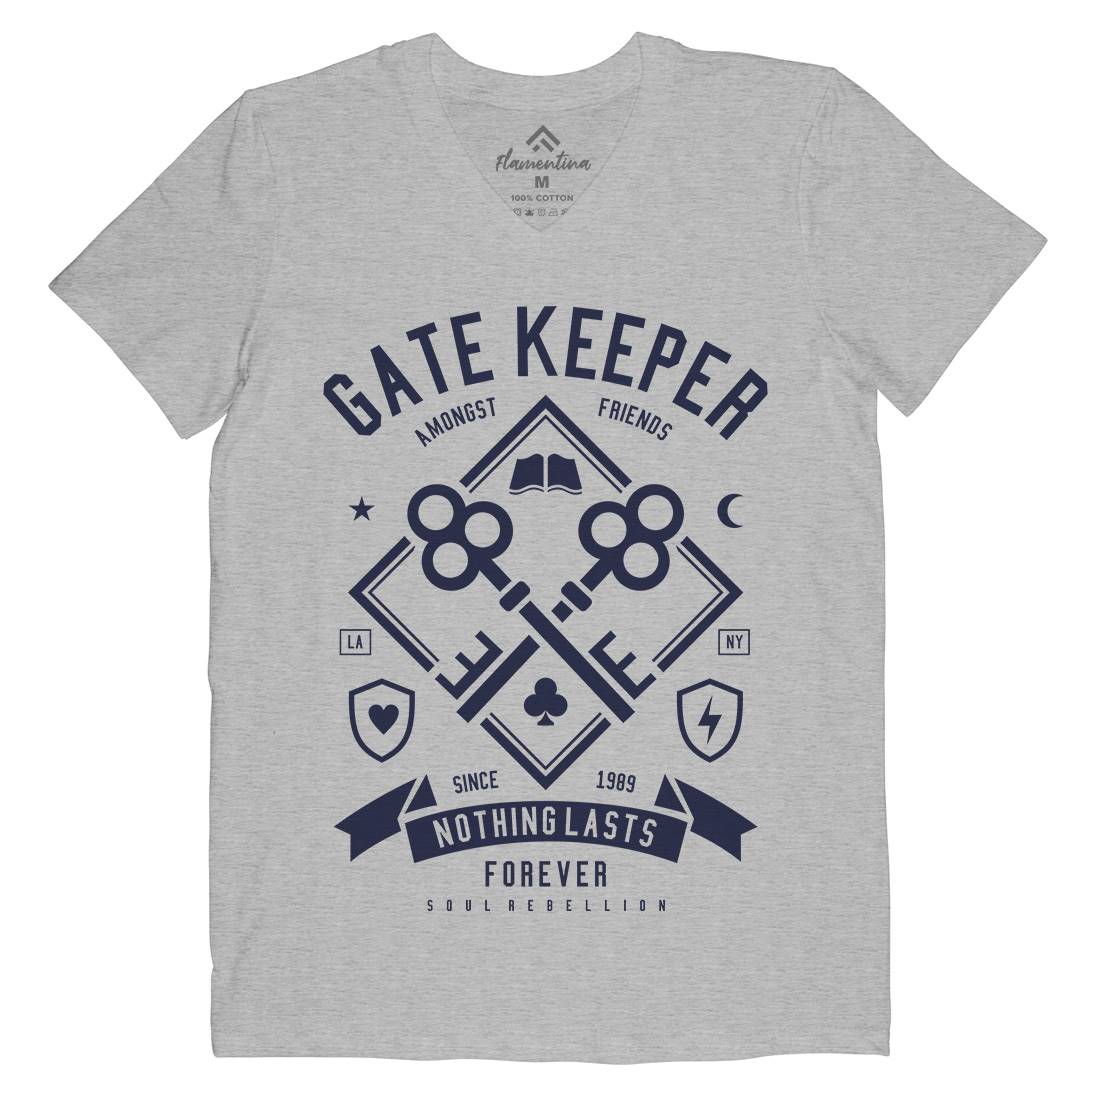 Gate Keeper Mens V-Neck T-Shirt Quotes A232